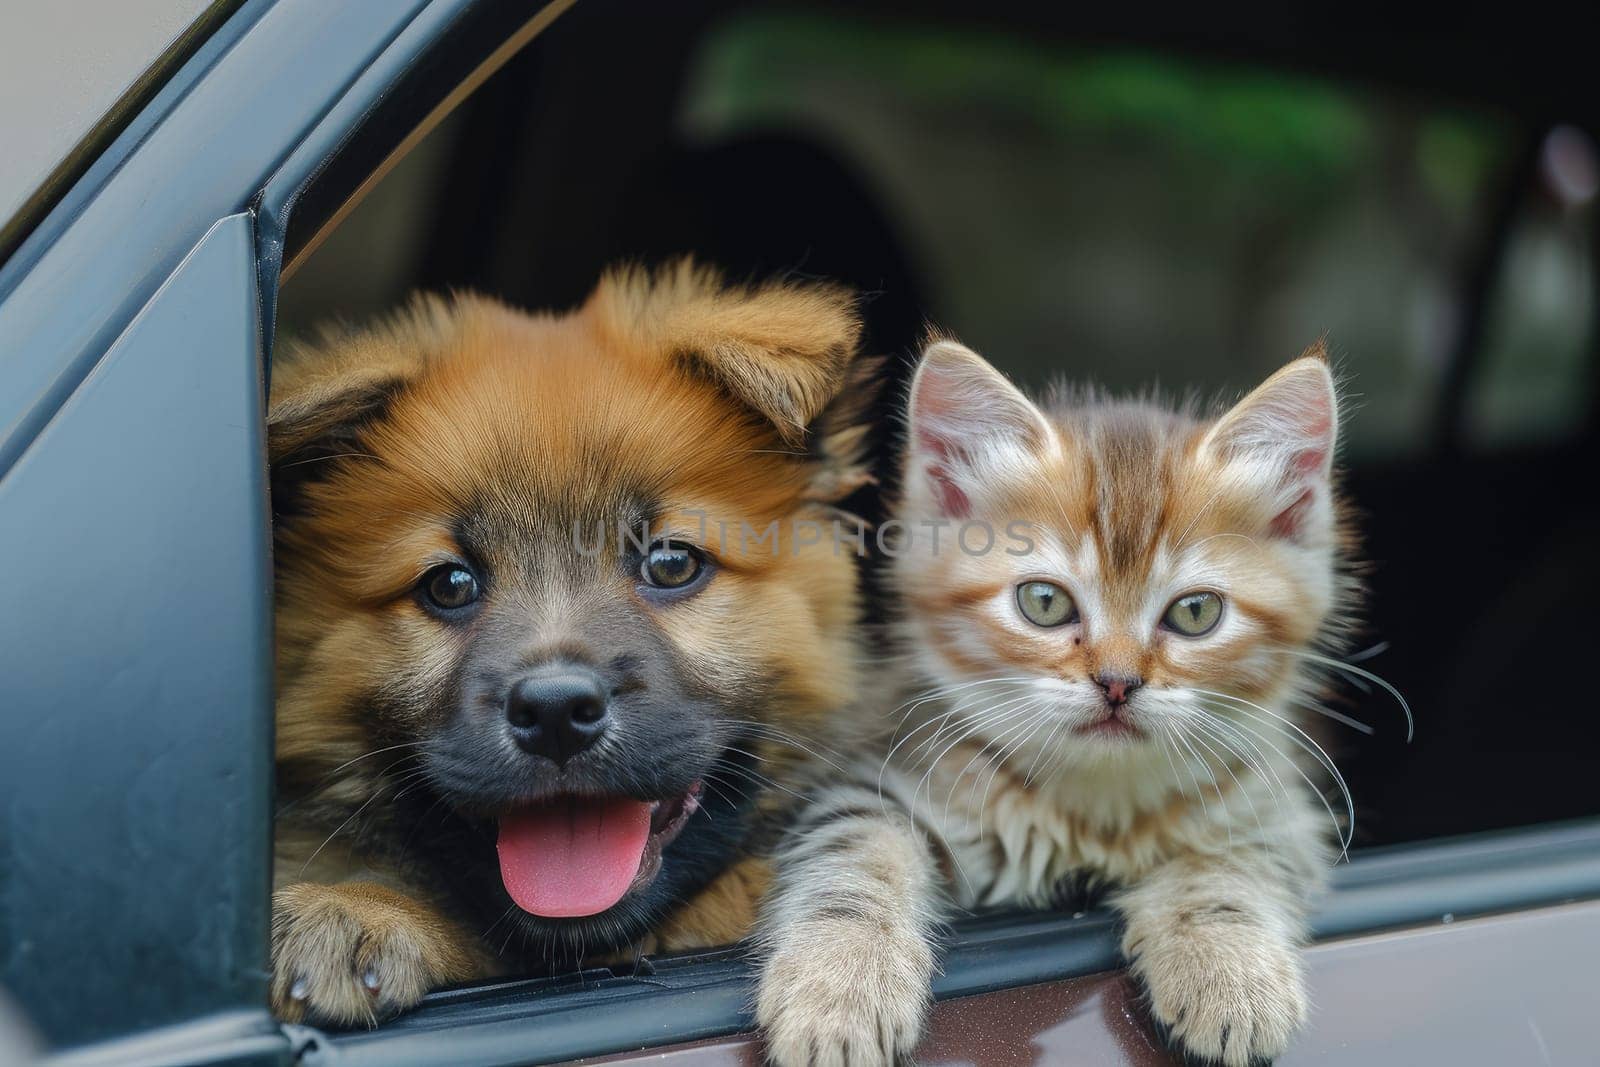 Happy dog and cat together in car looking out of the window. summer vocation travel by nijieimu